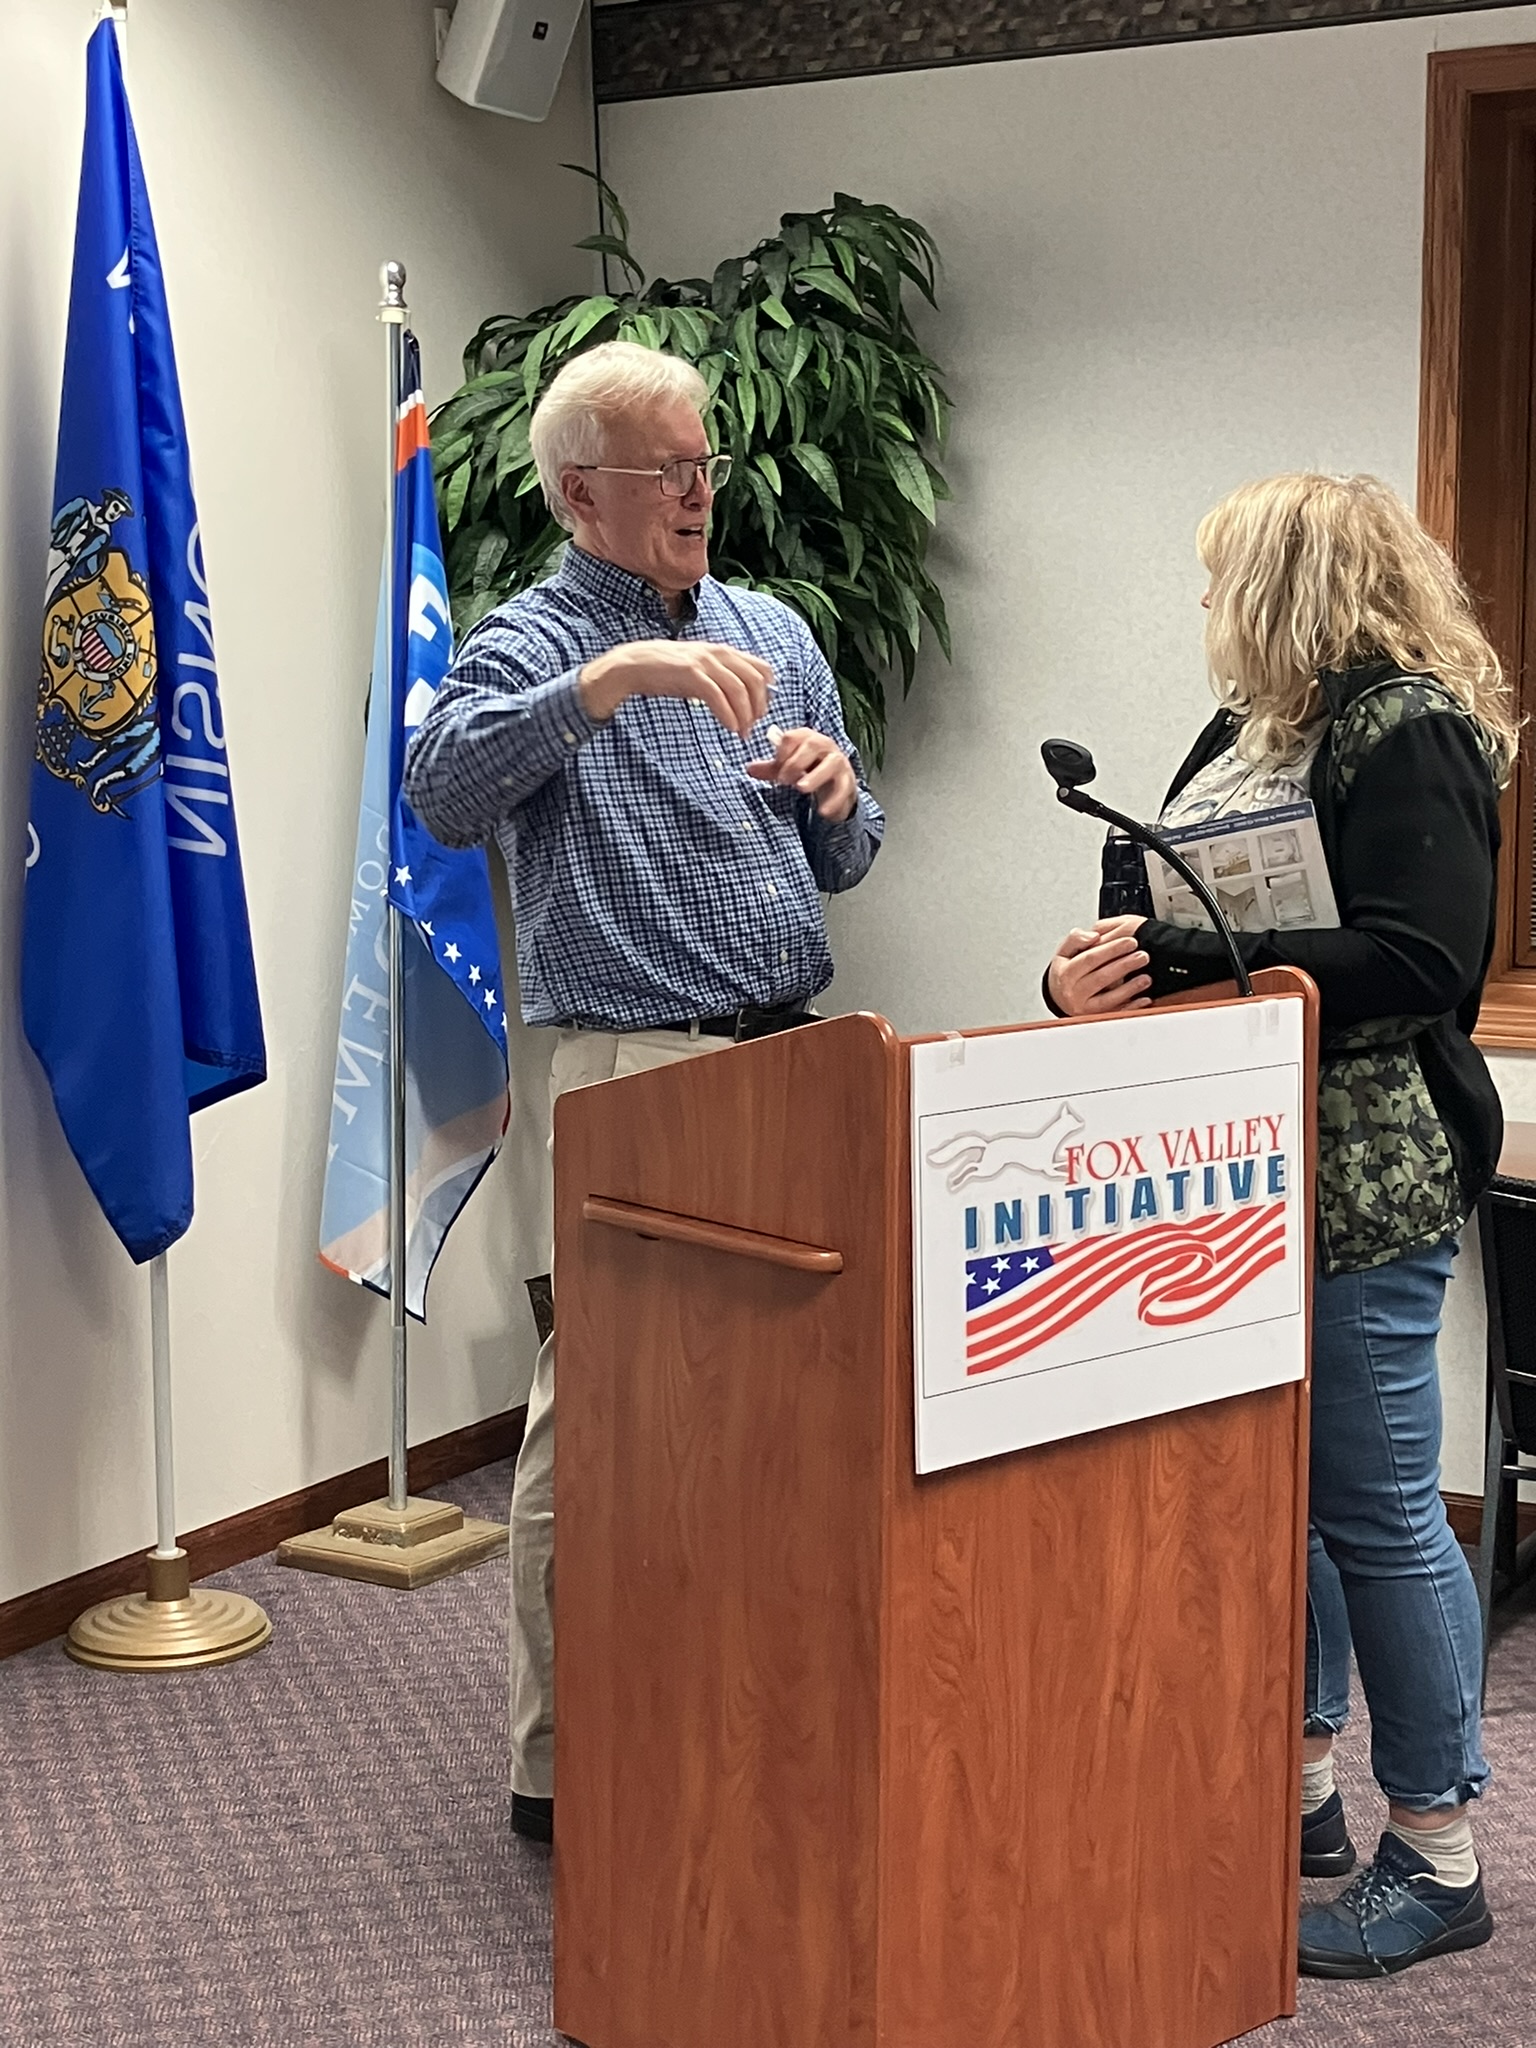 John Pudner, president of Take Back Our Republic Action Fund, chatted with guests after the November 6, 2023 meeting of Fox Valley Initiative in Appleton, Wisconsin.